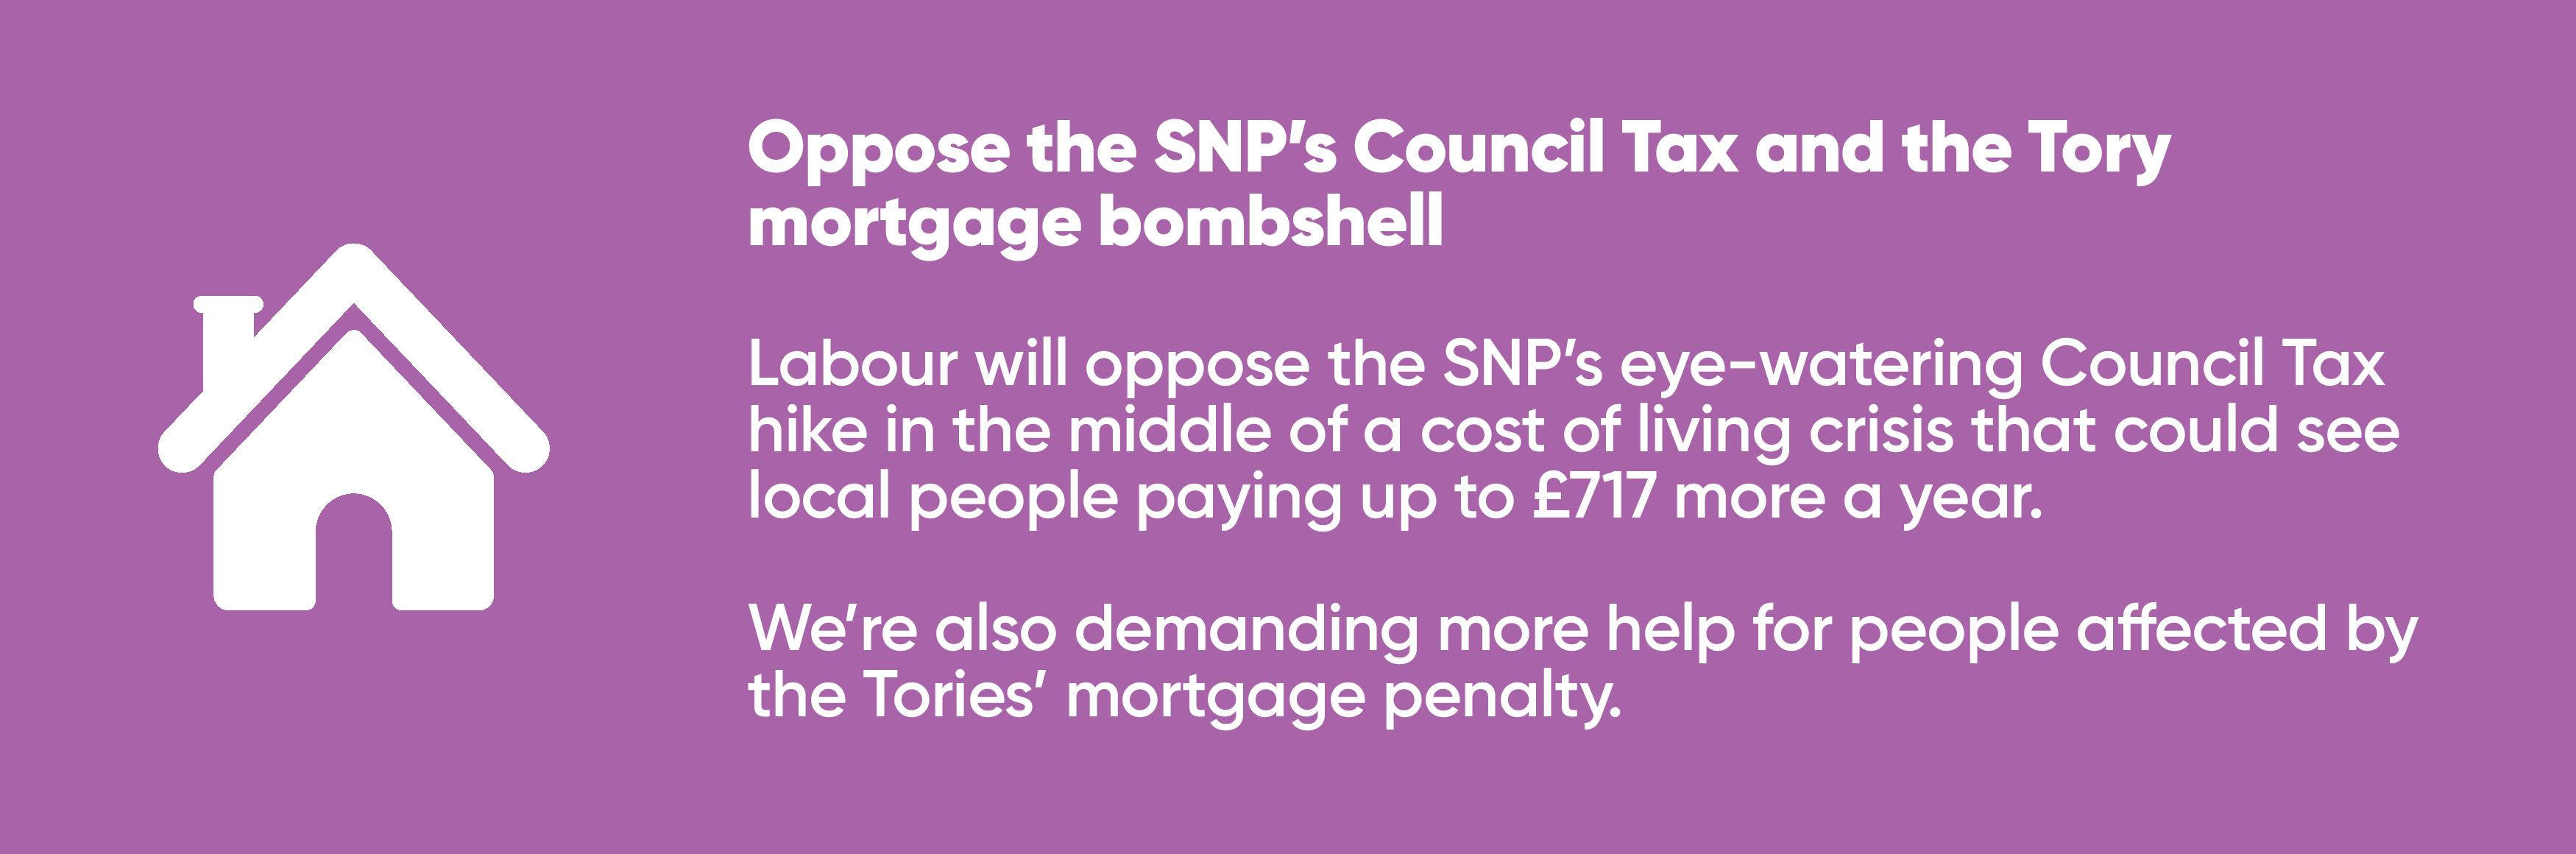 Oppose the SNPs Council Tax and Tory mortgage bombshells 